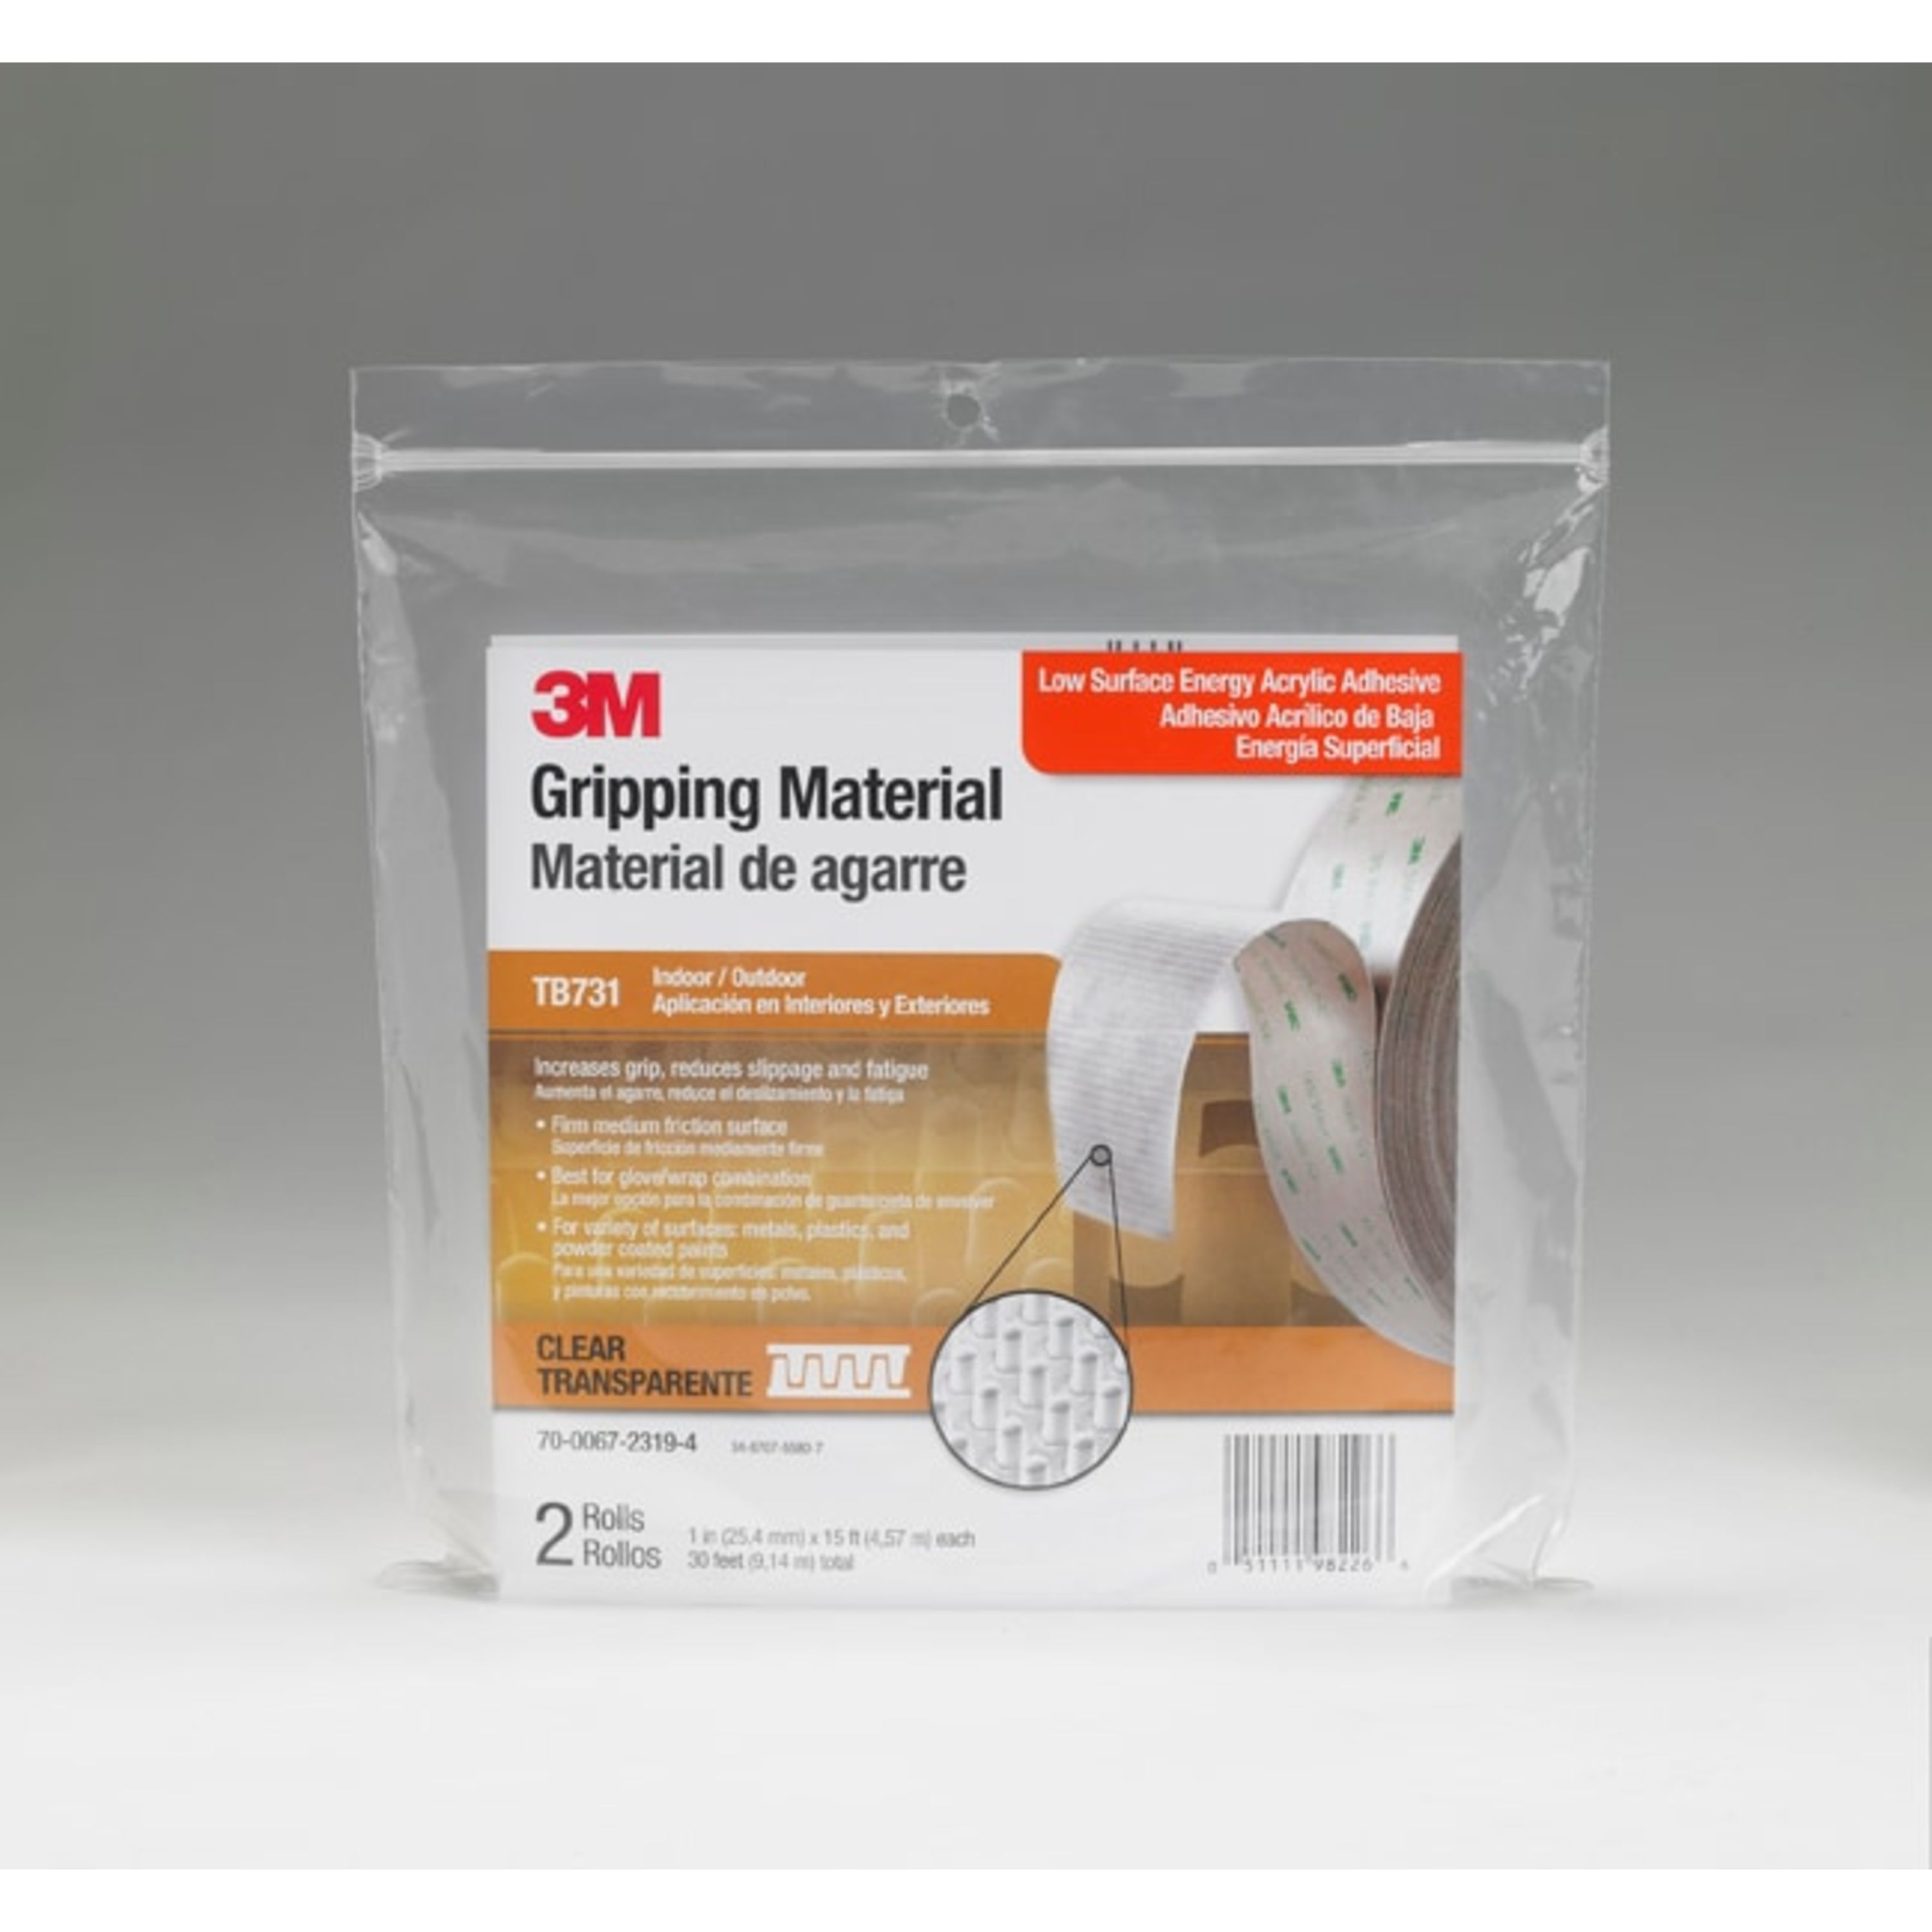 3M™ Gripping Material TB731, Clear, 1 in x 15 ft, 2 rolls per bag